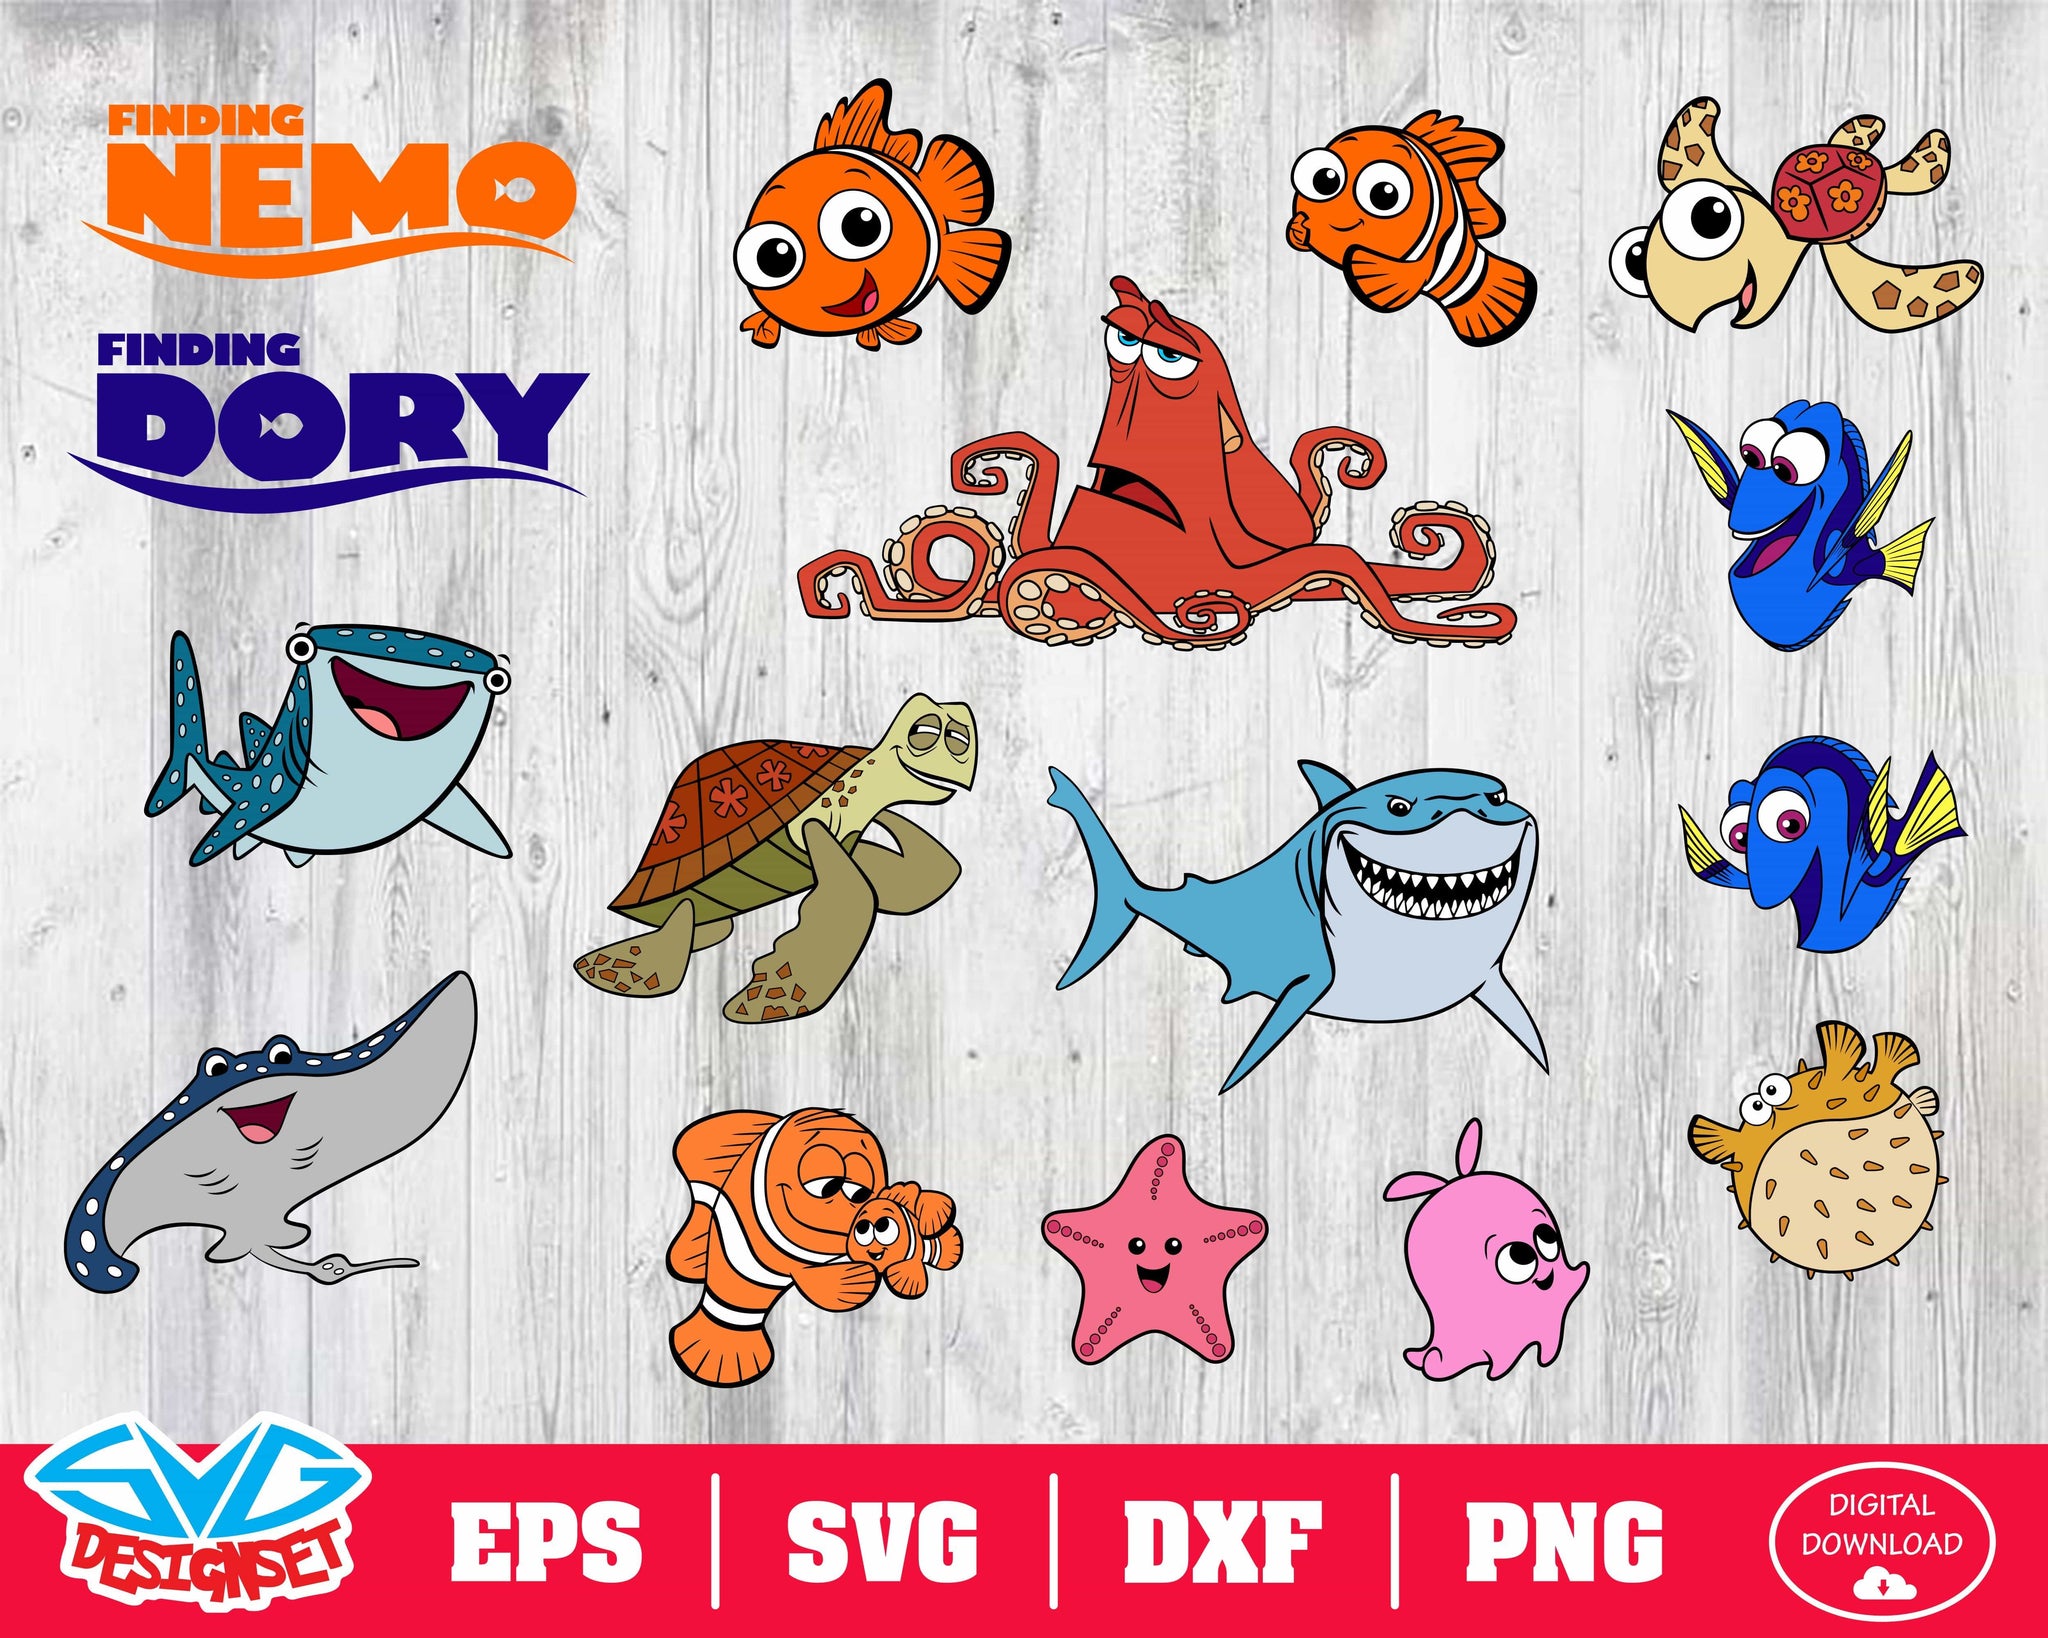 Nemo and Dory Svg, Dxf, Eps, Png, Clipart, Silhouette and Cutfiles #1 - SVGDesignSets